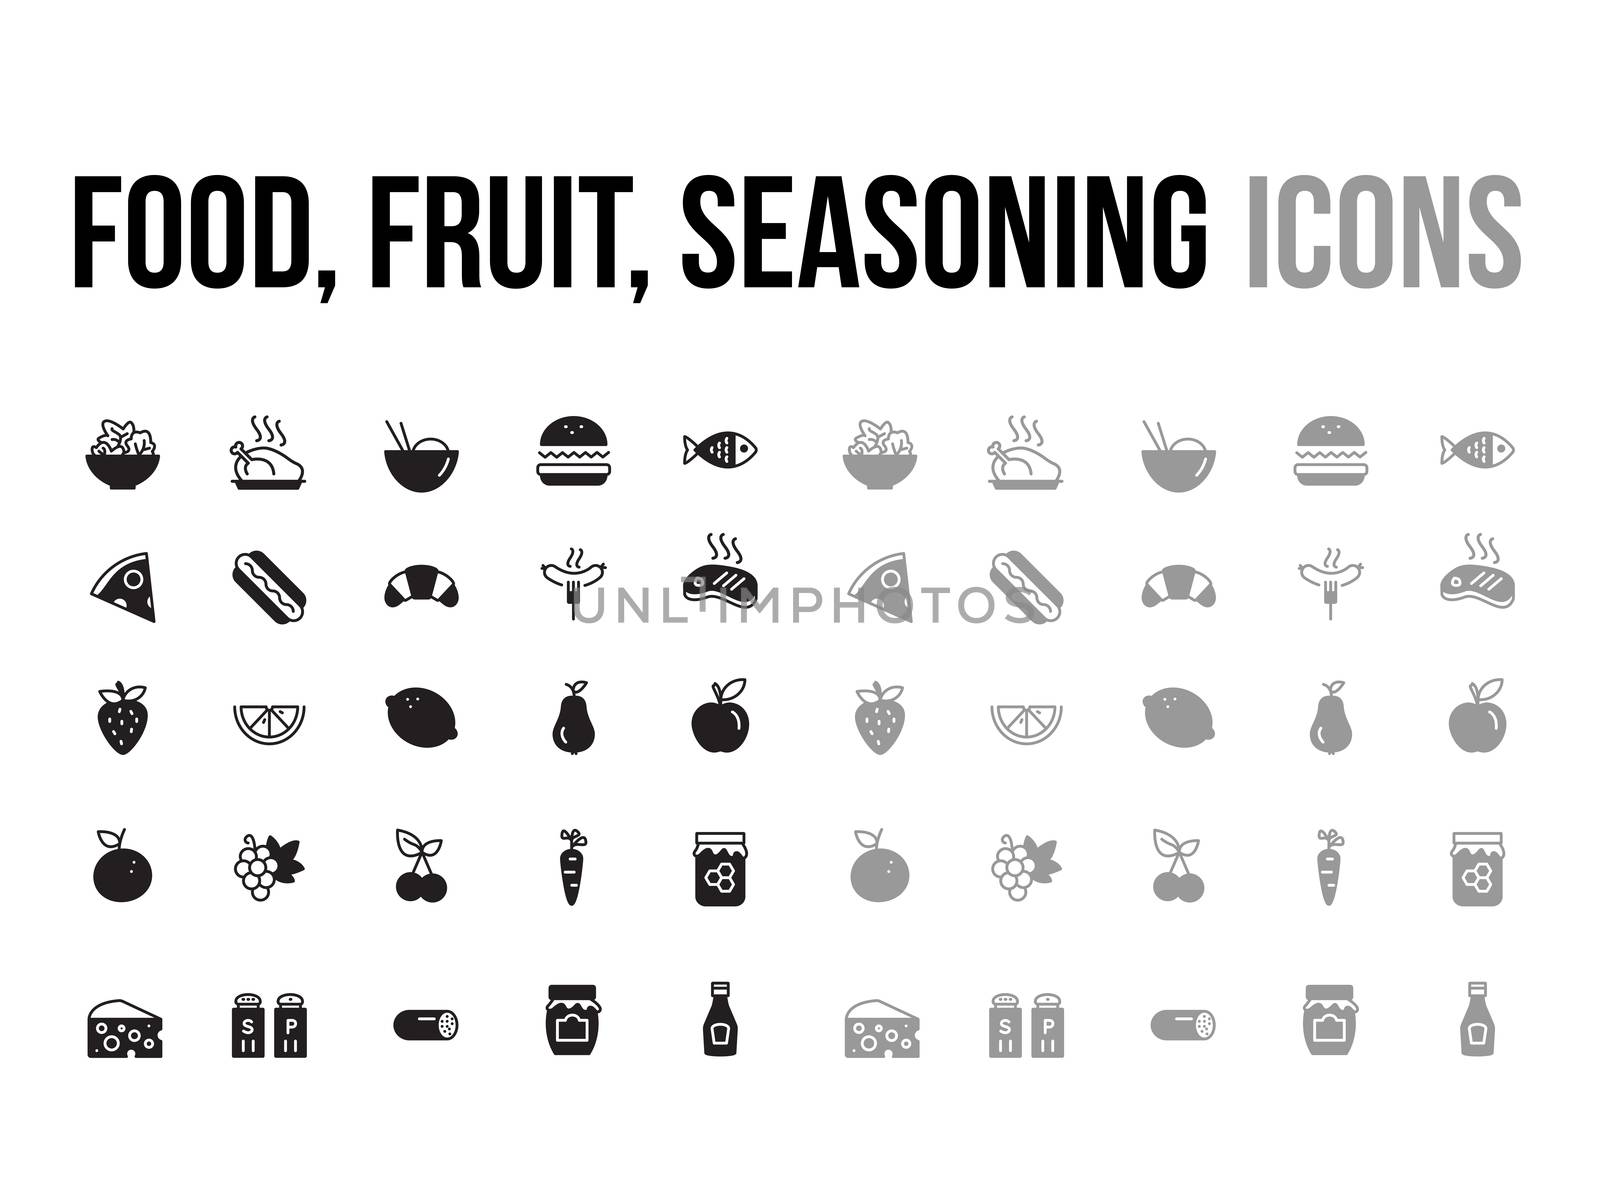 Food, fruit, seasoning vector icon collection by cougarsan